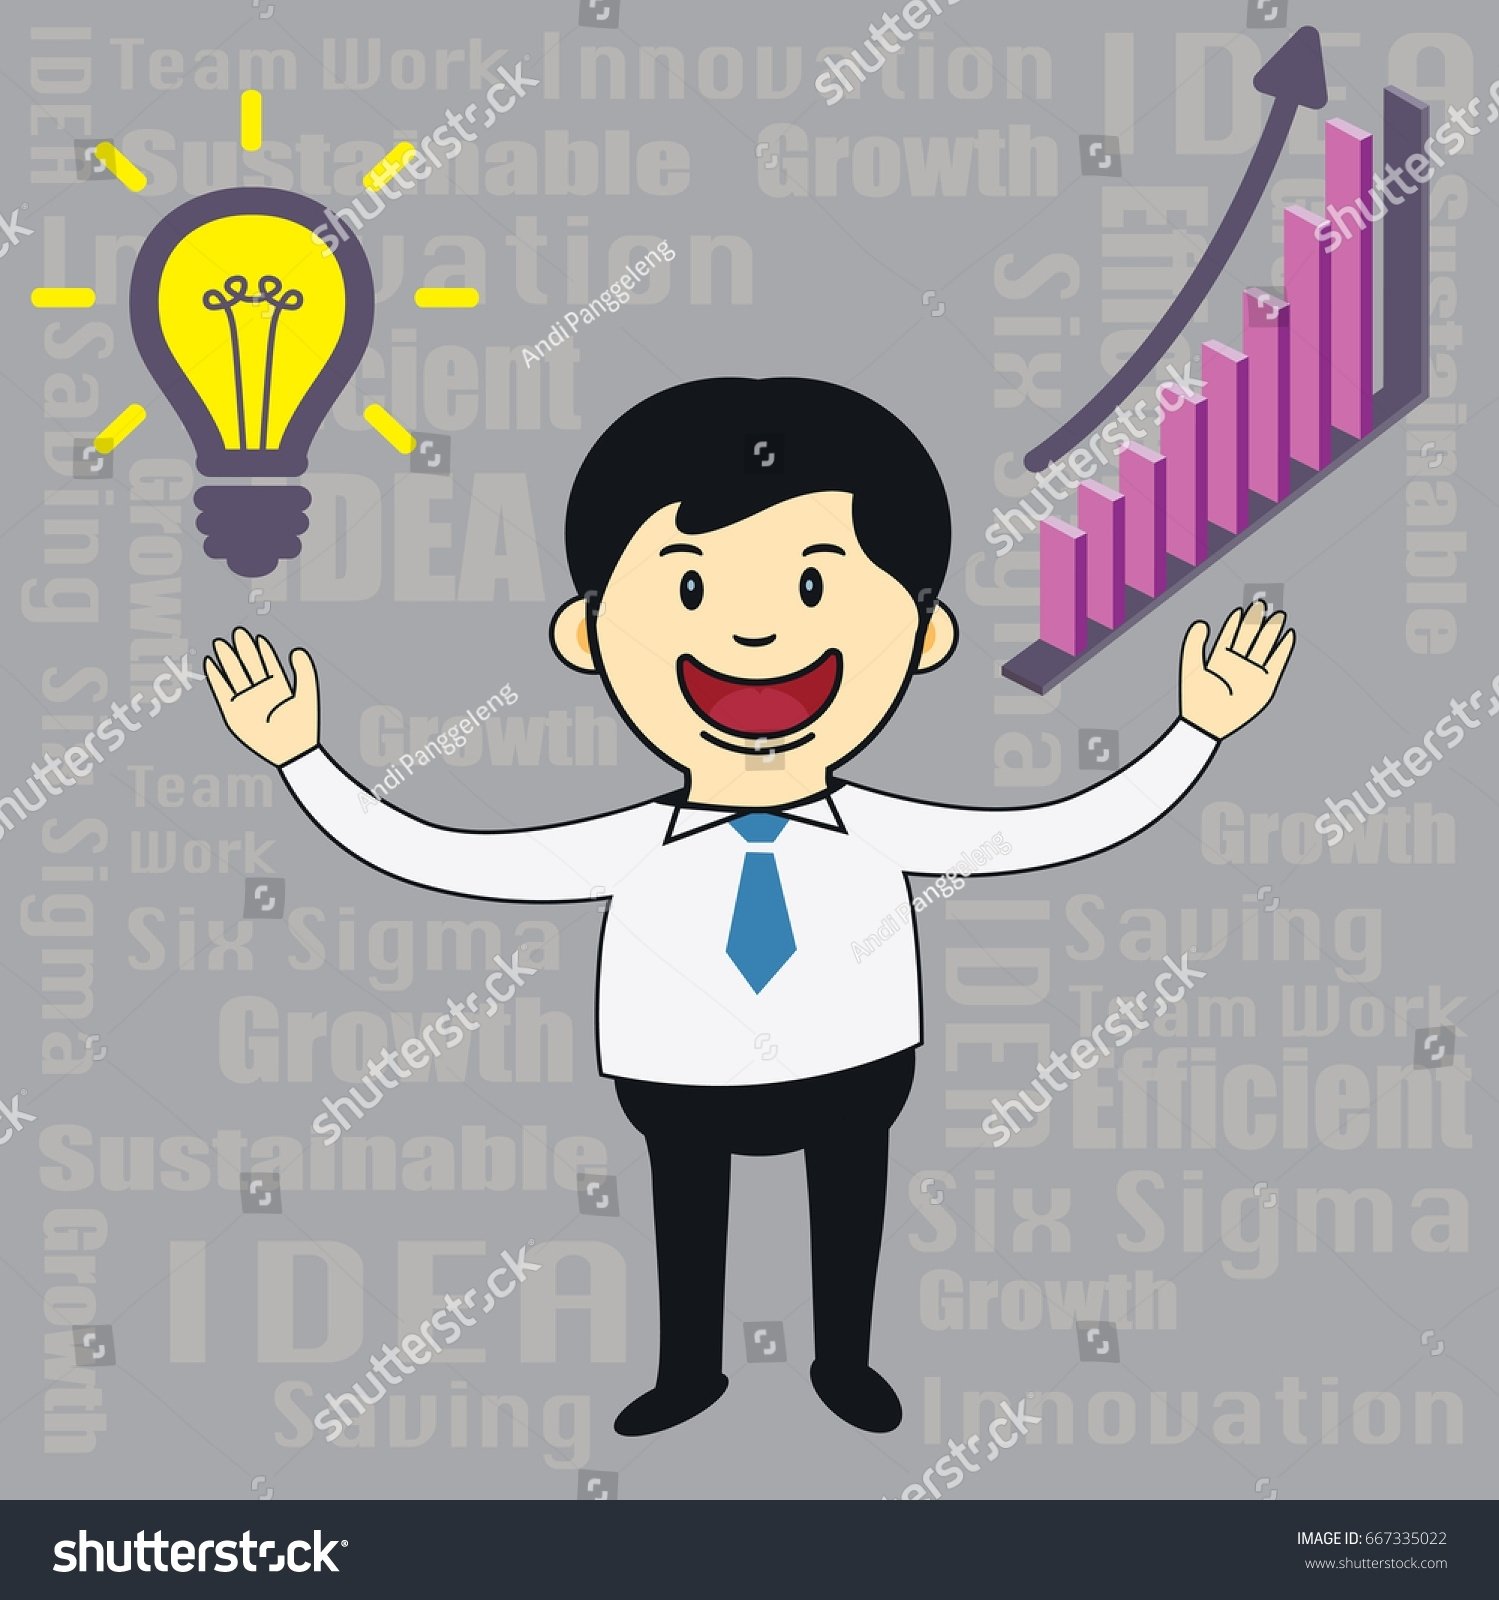 10 Spectacular Do You Have Any Idea do you have any idea business stock vector 667335022 shutterstock 2022